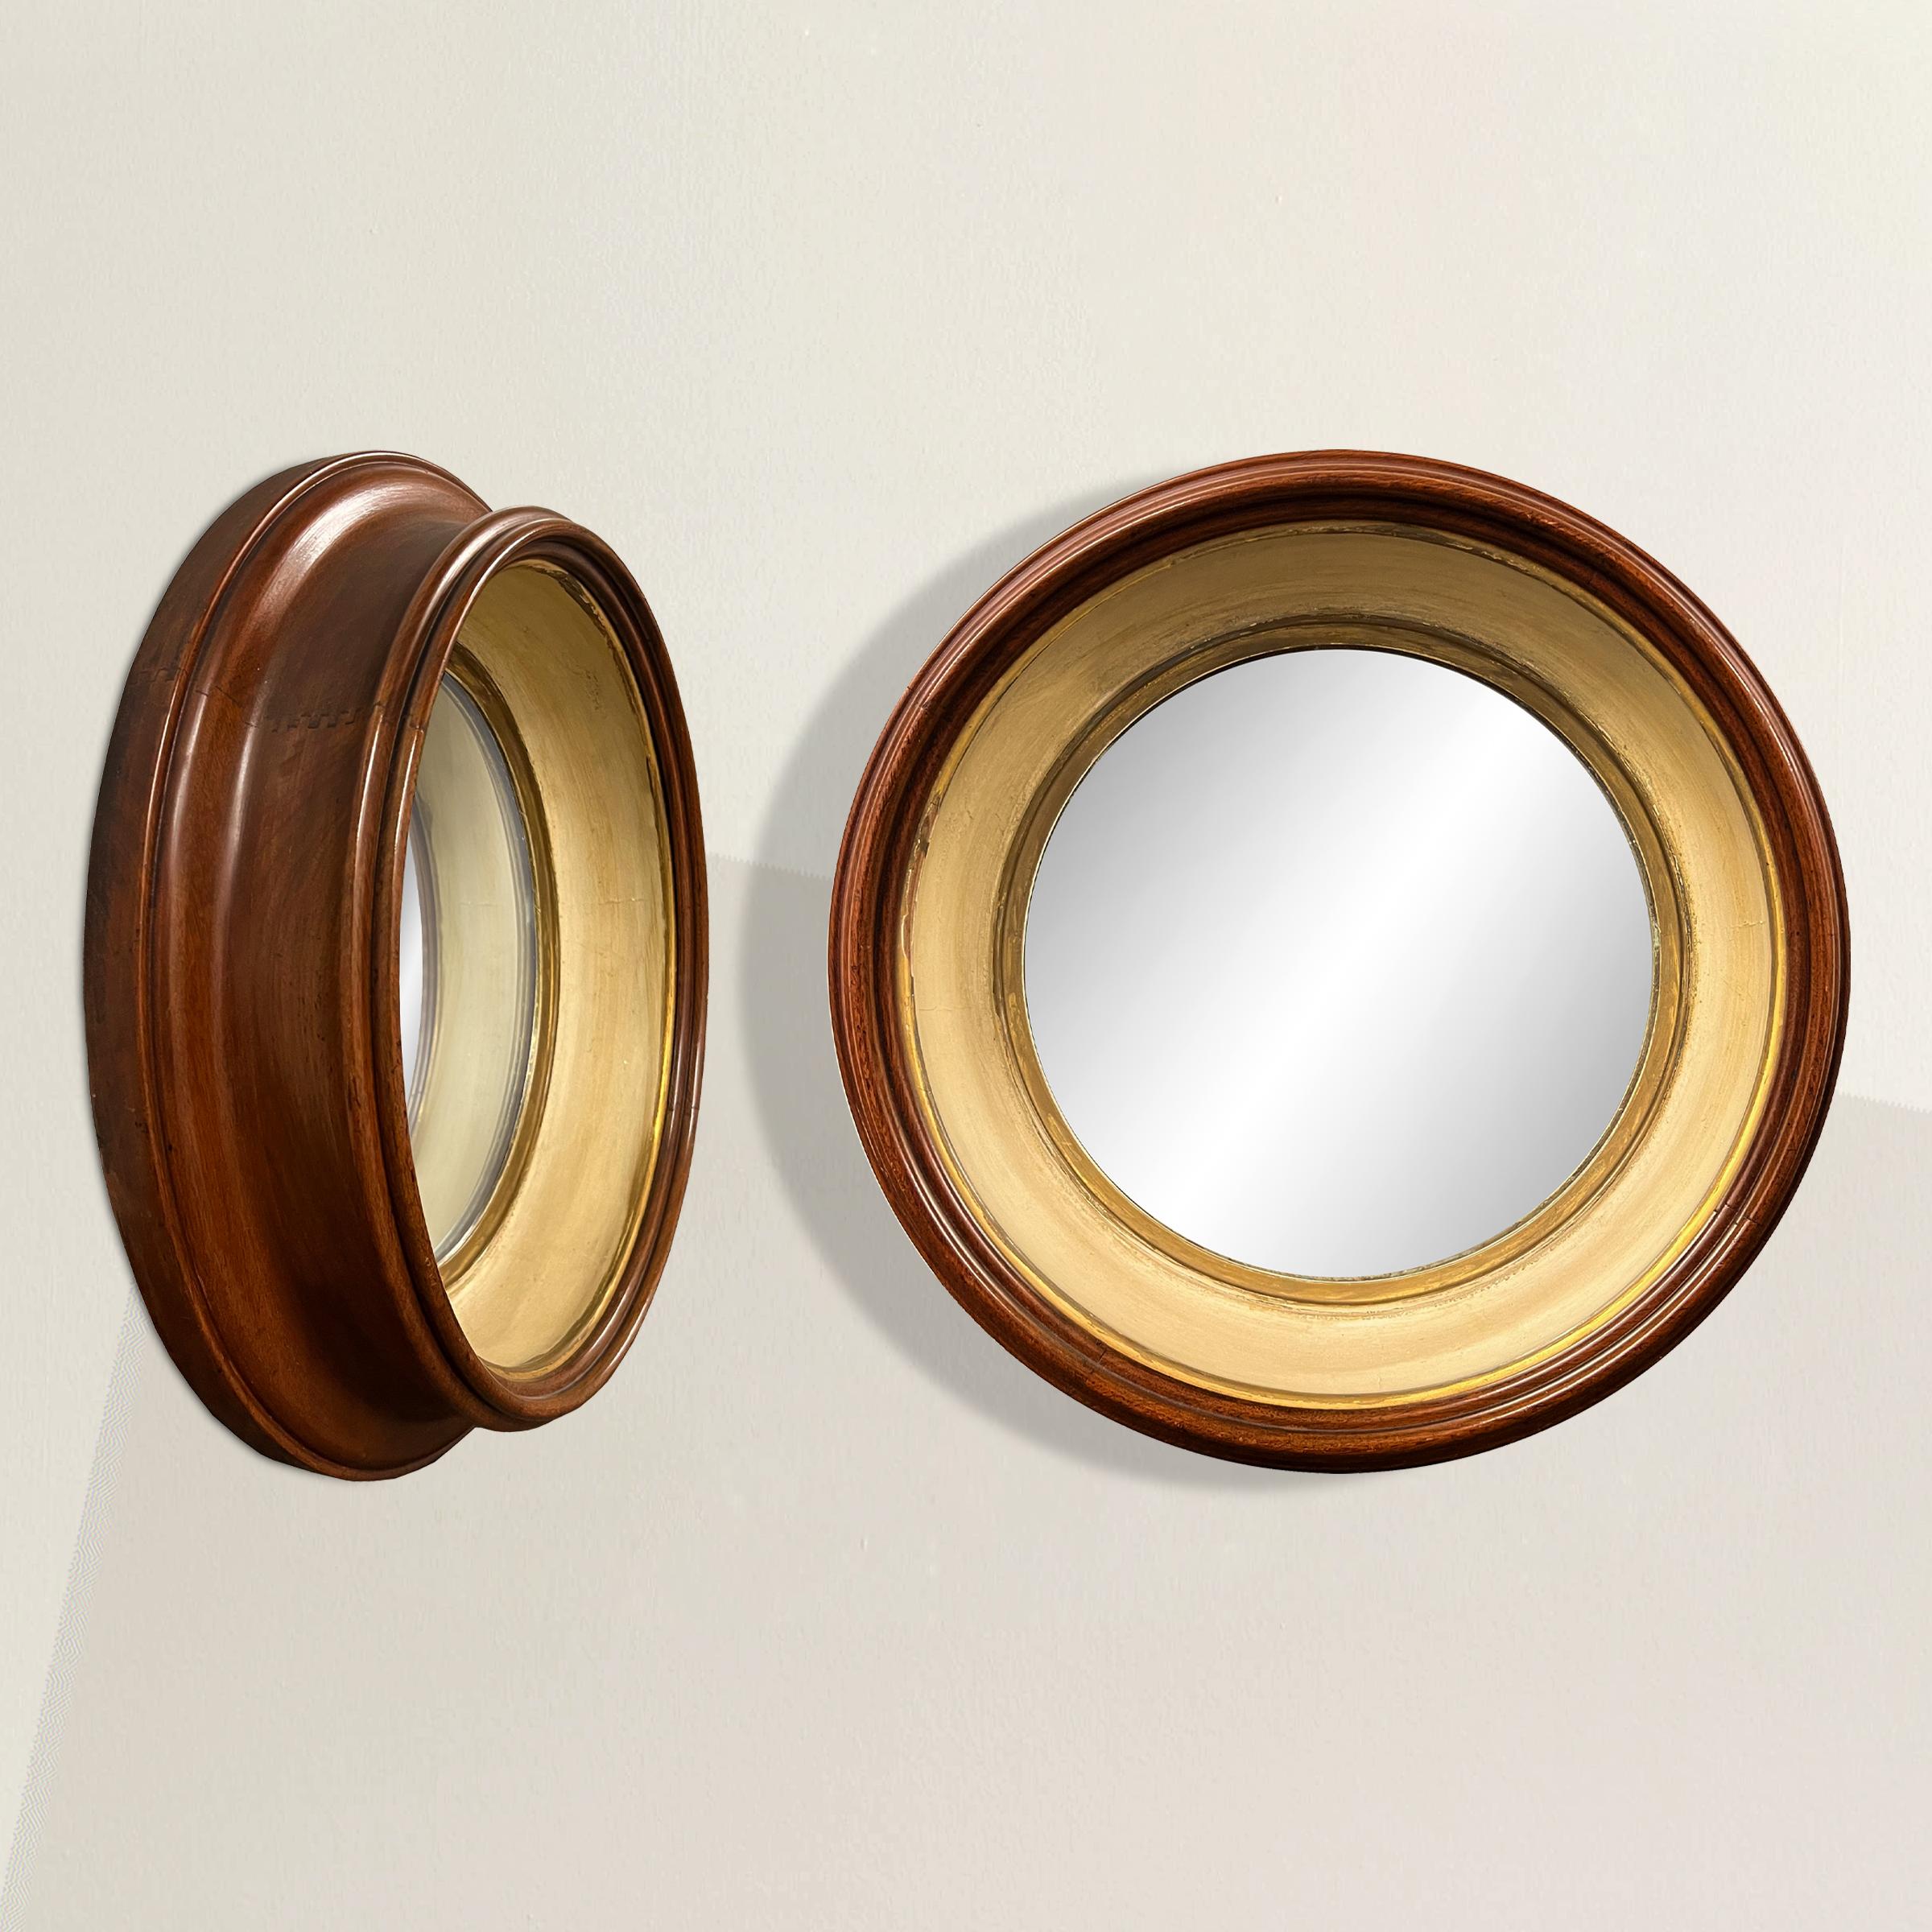 Transform your living space with a pair of Georgian round mirrors that encapsulate the refinement of 19th-century English design. Crafted with an exceptional eye for detail, these mirrors boast unusually deep mahogany frames adorned with gold leaf